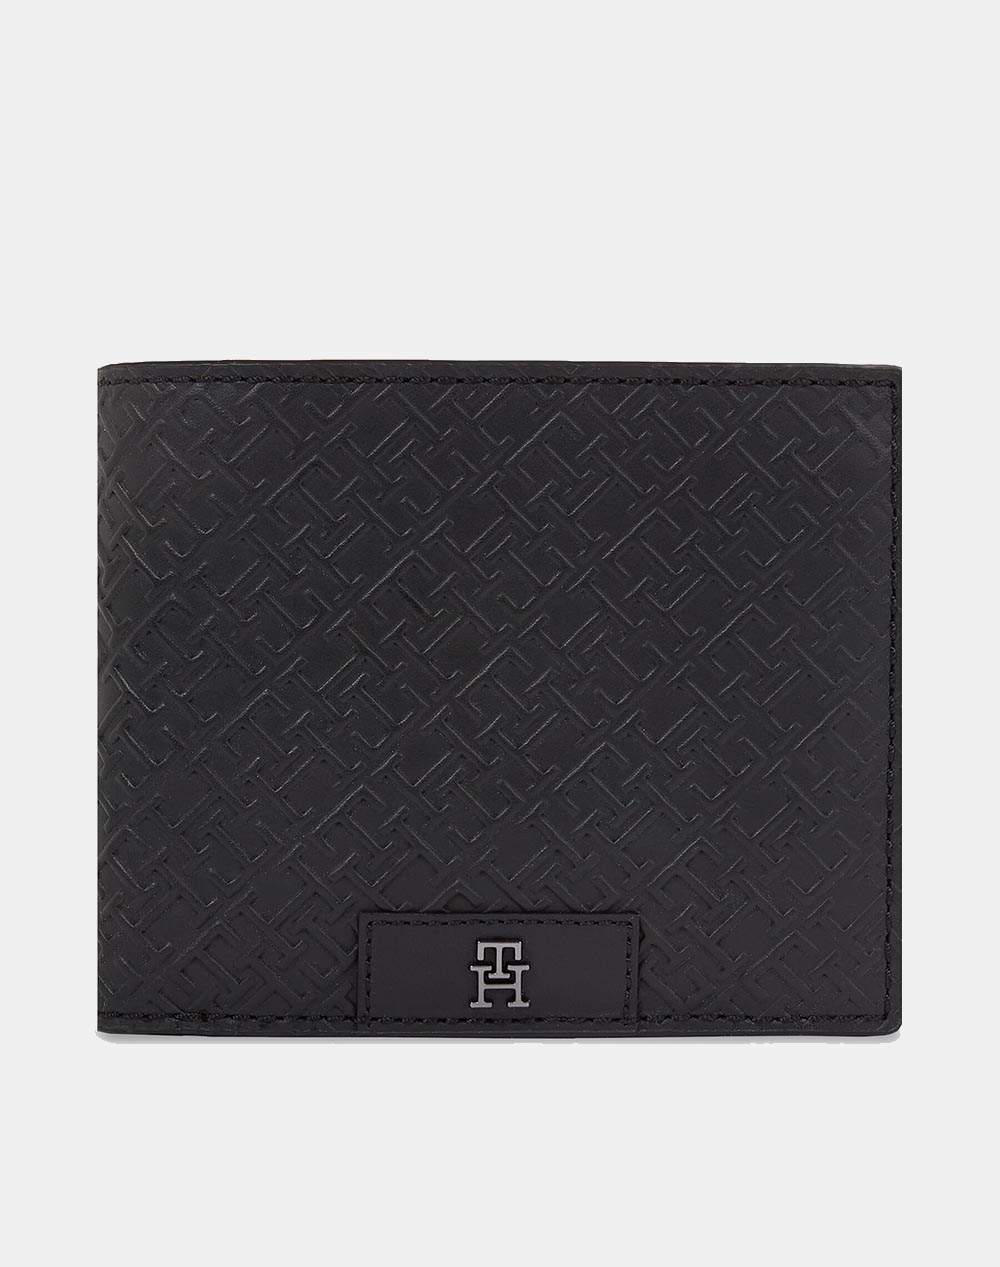 TOMMY HILFIGER TH MONOGRAM CC AND COIN (Dimensions: 9.8 x 12 x 1.8 cm)